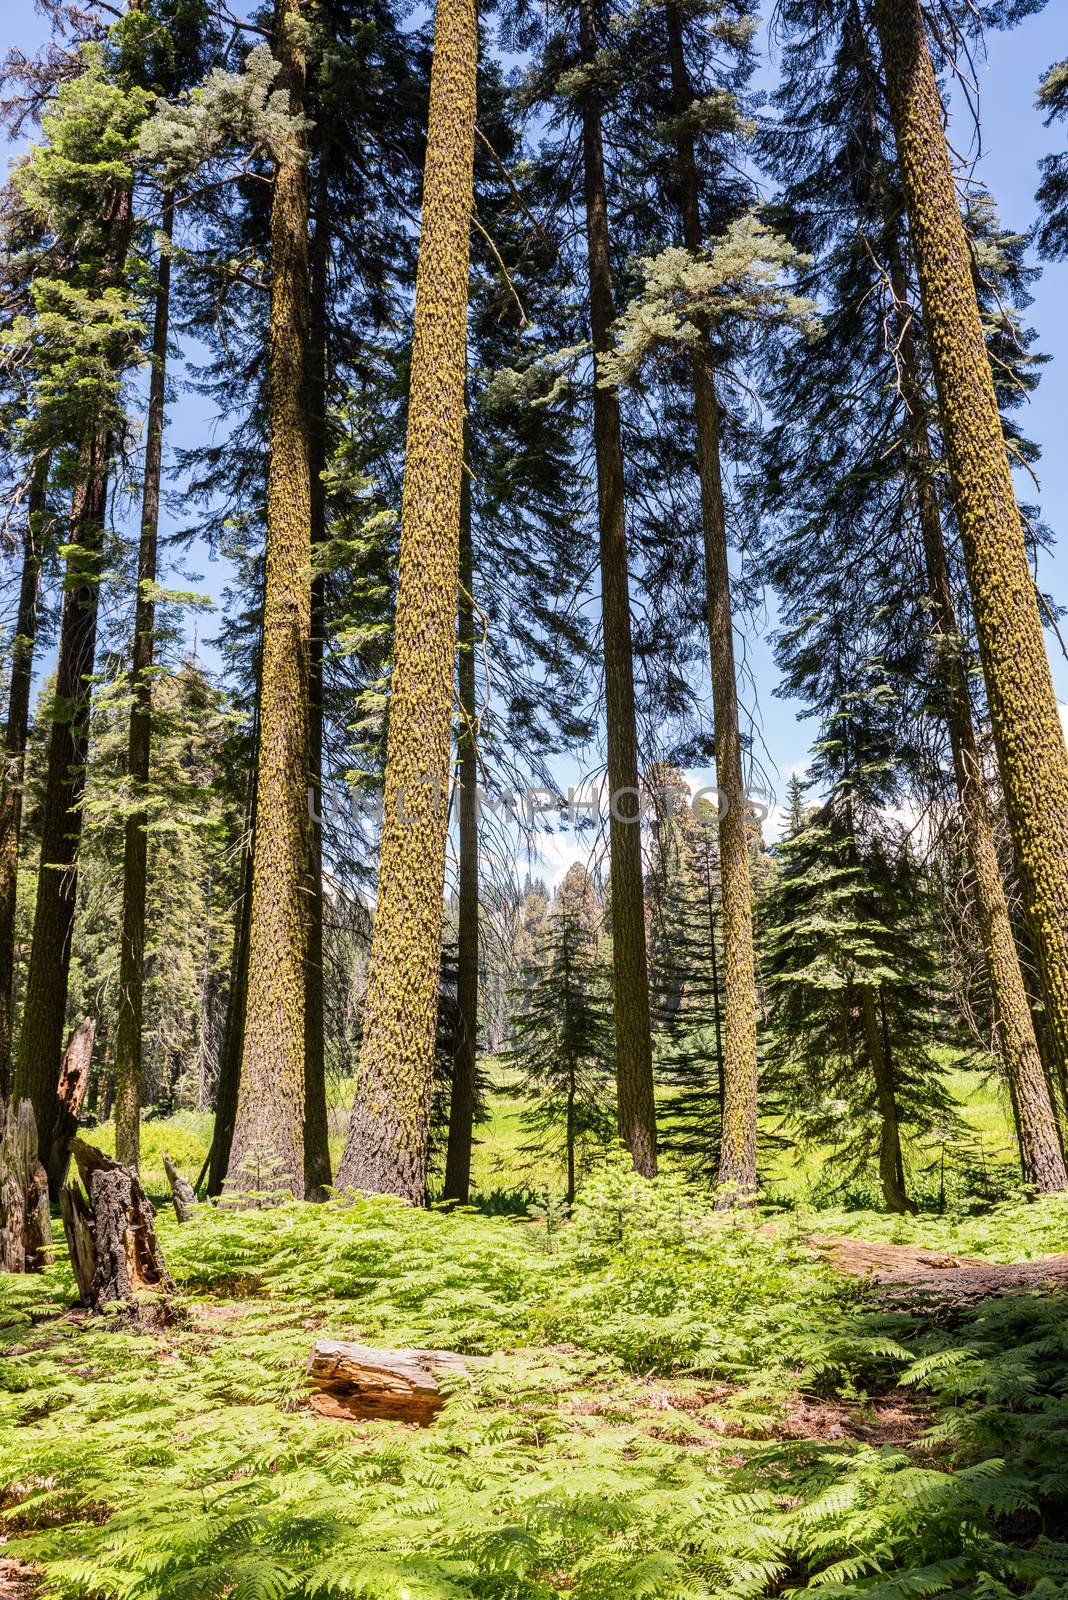 Trees and ferns along Crescent Meadow Loop in Sequoia National Park, California by Njean